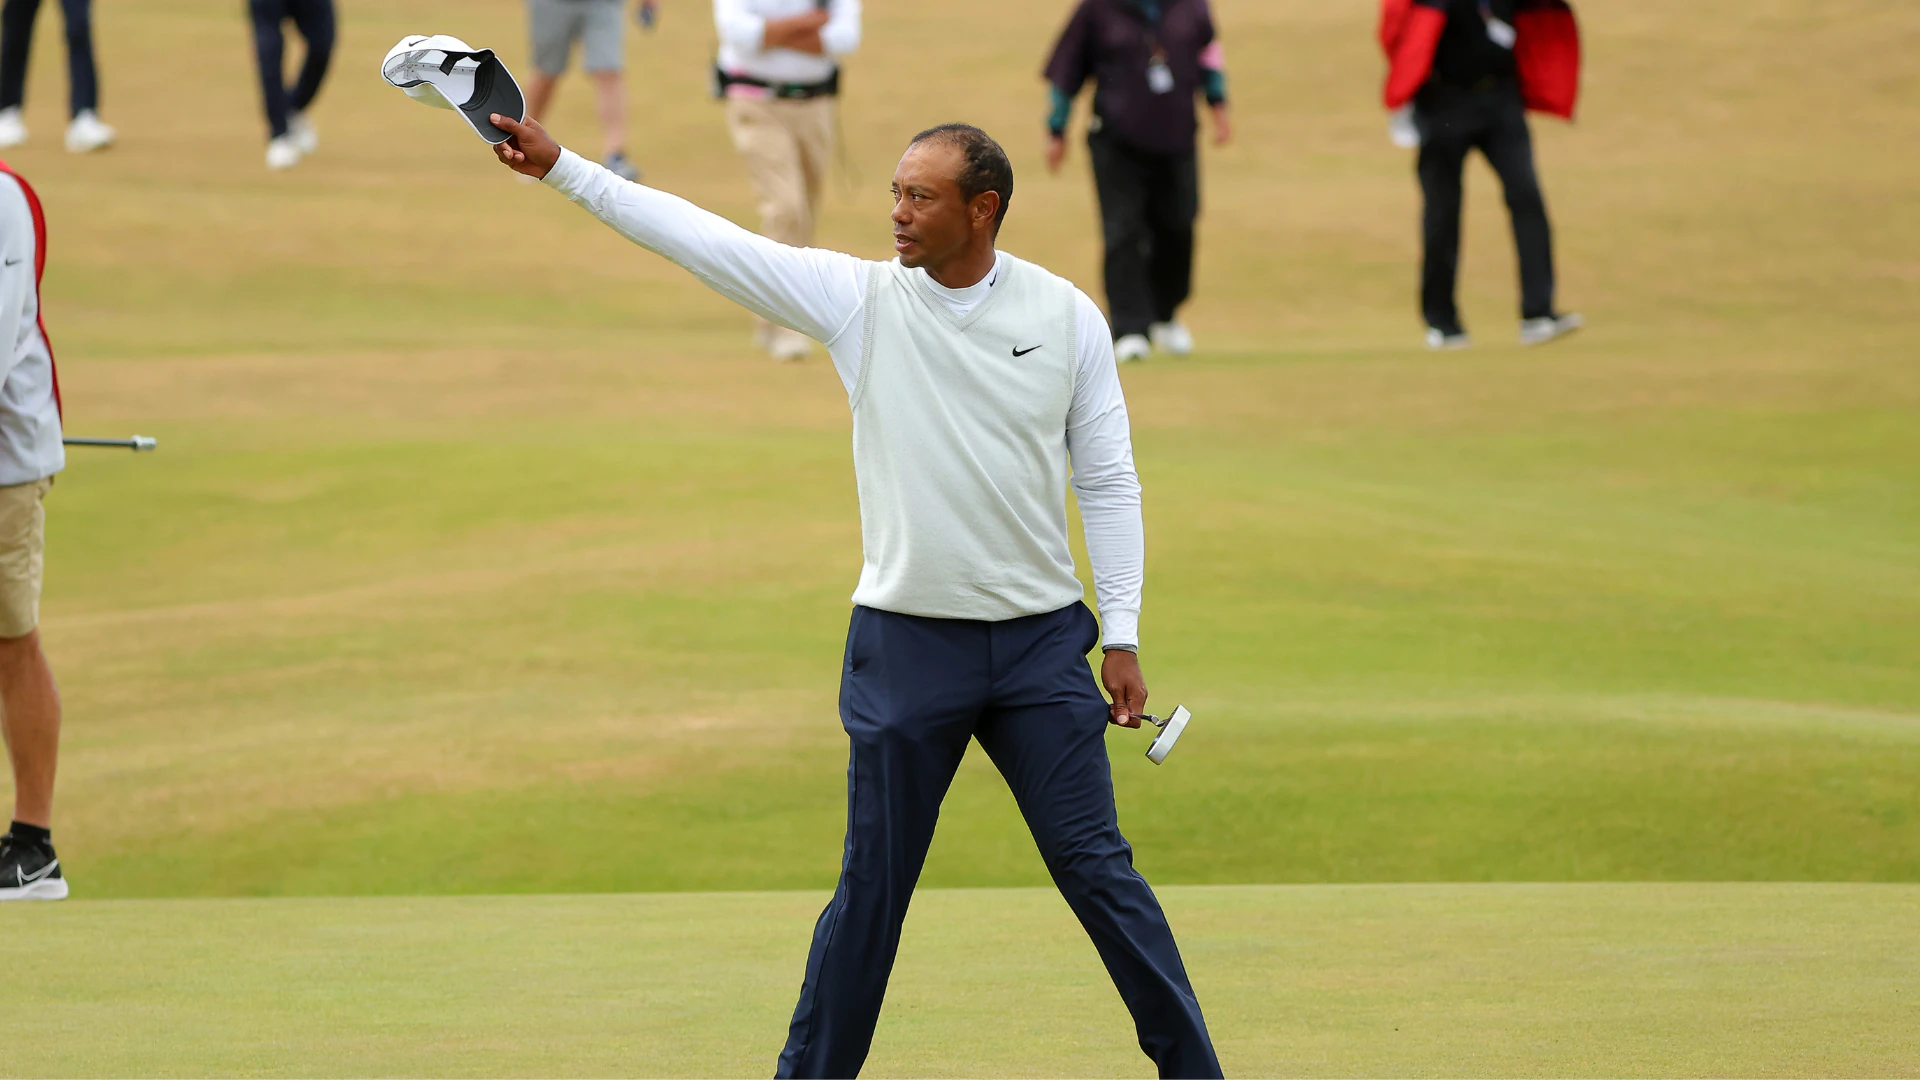 2022 British Open: Tiger Woods cherishes likely final walk at St. Andrews in an Open